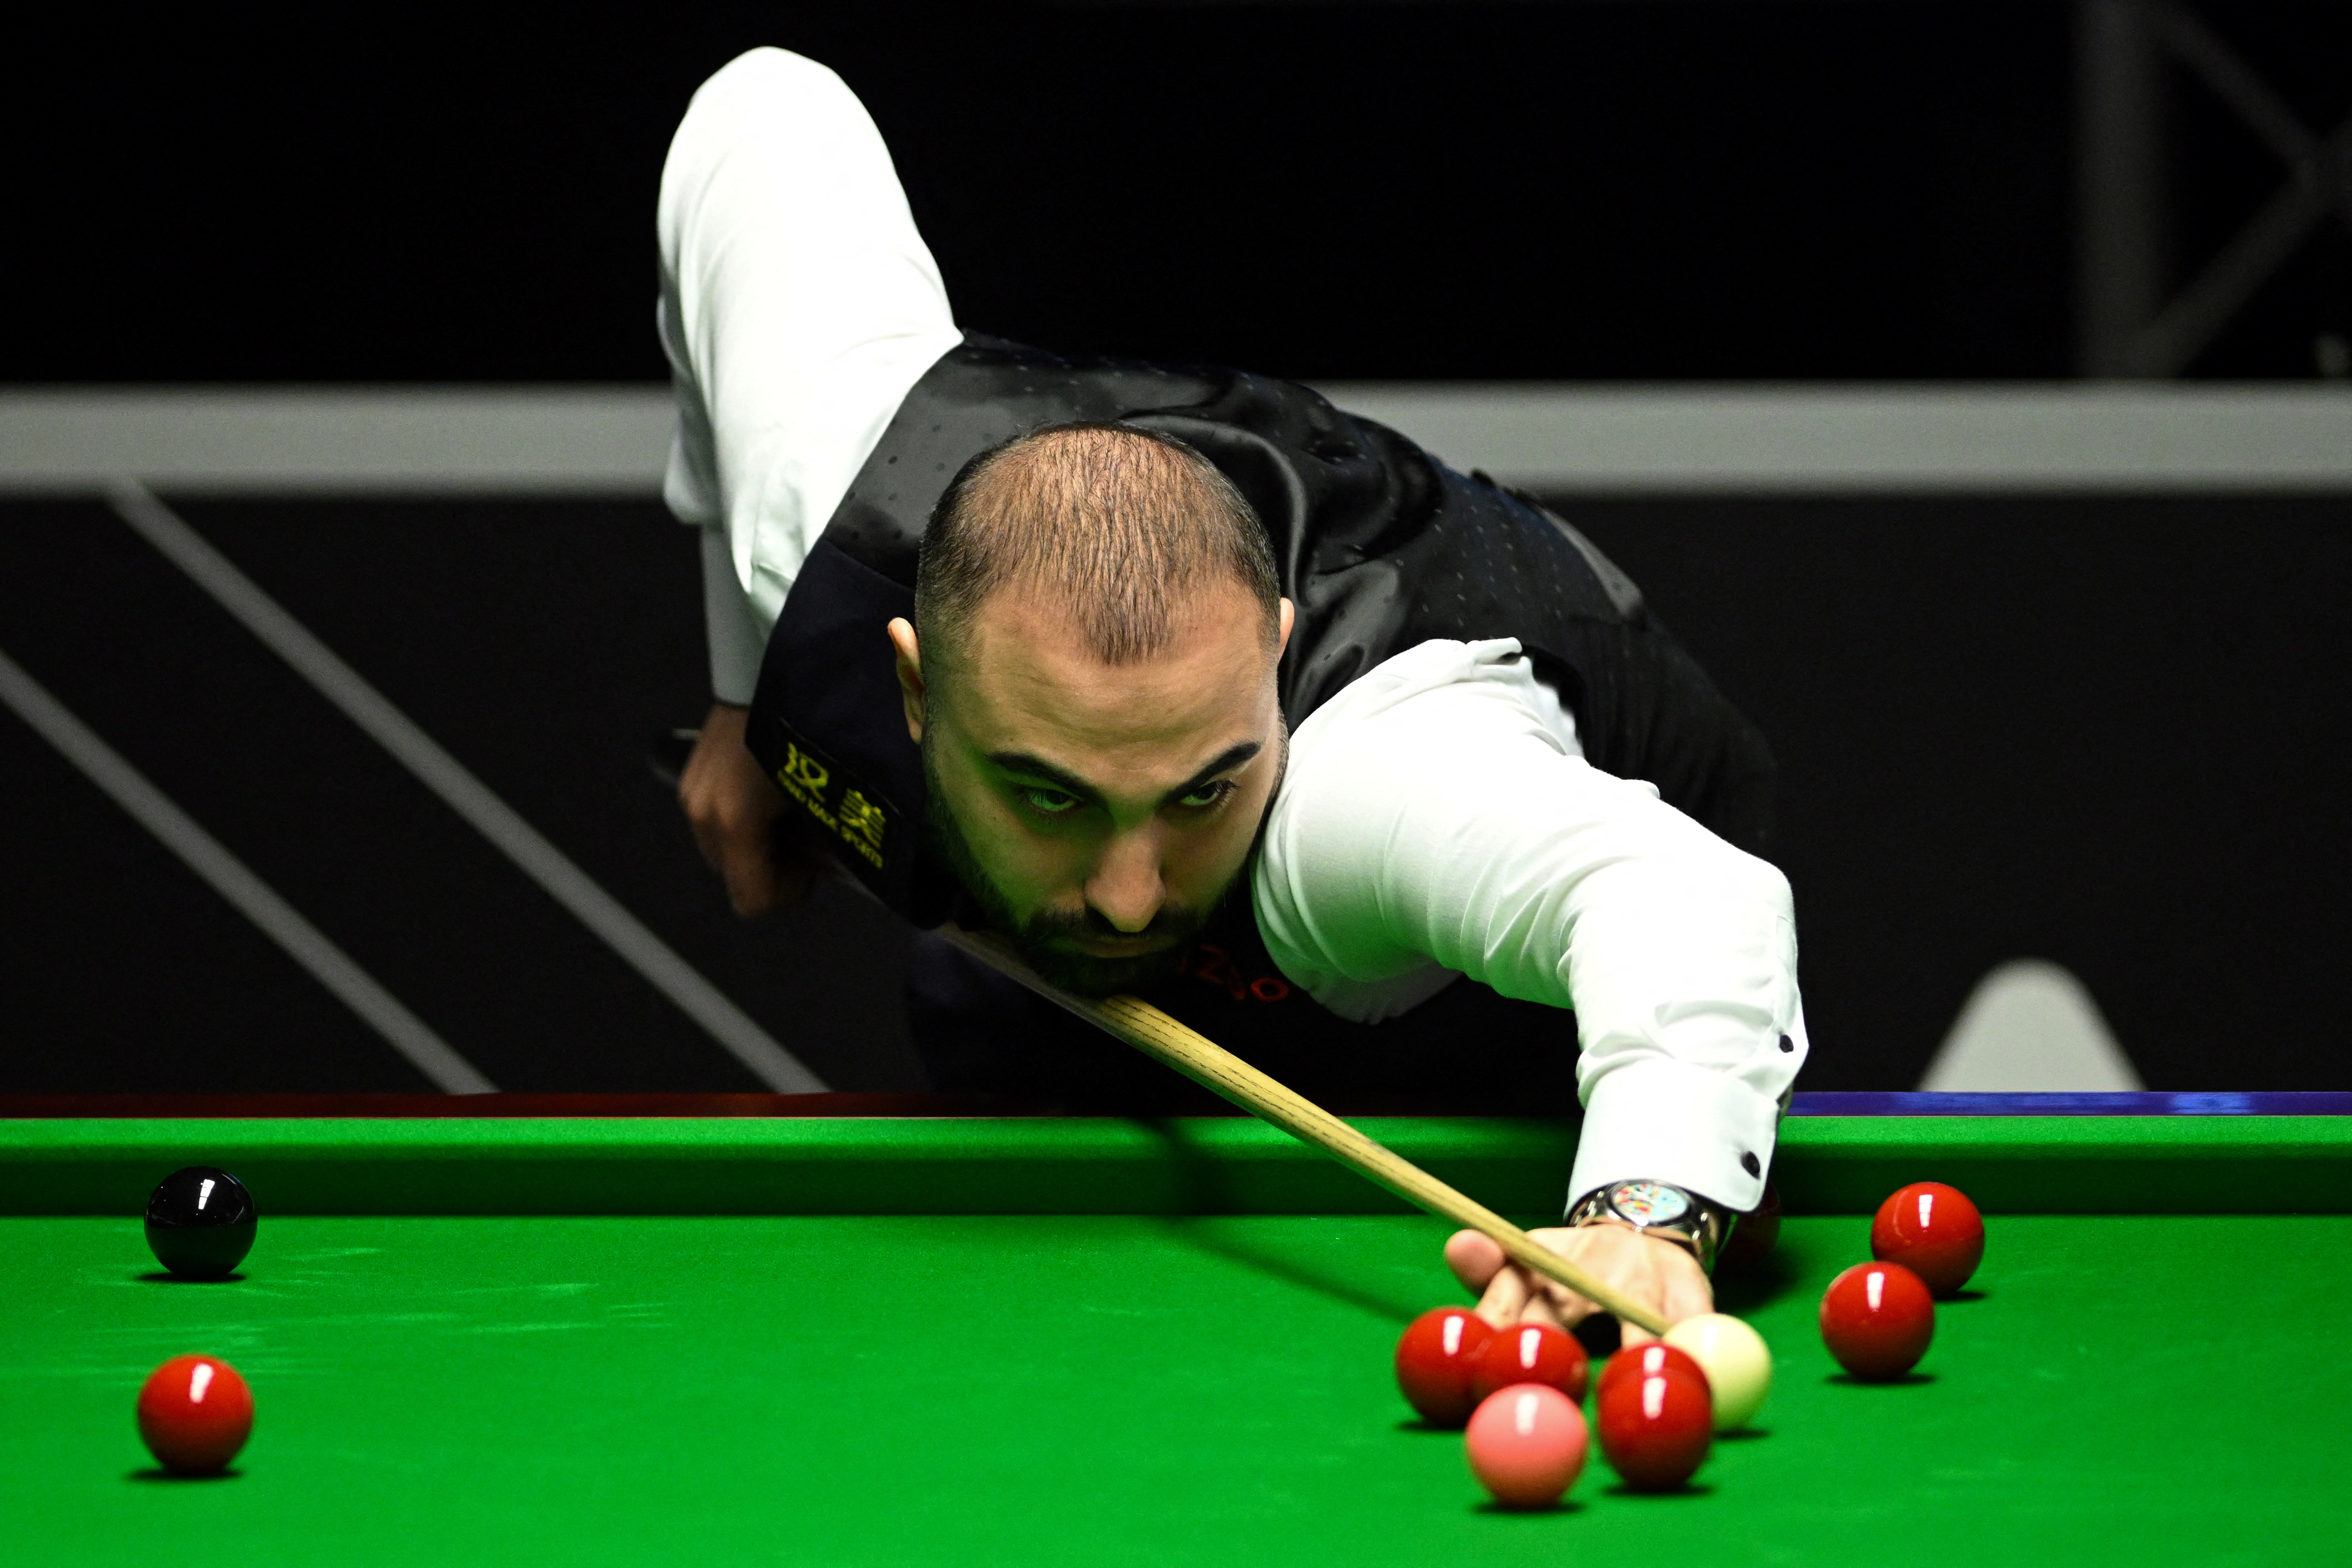 Vafaei is one player who would be happy to see the World Snooker Championship move